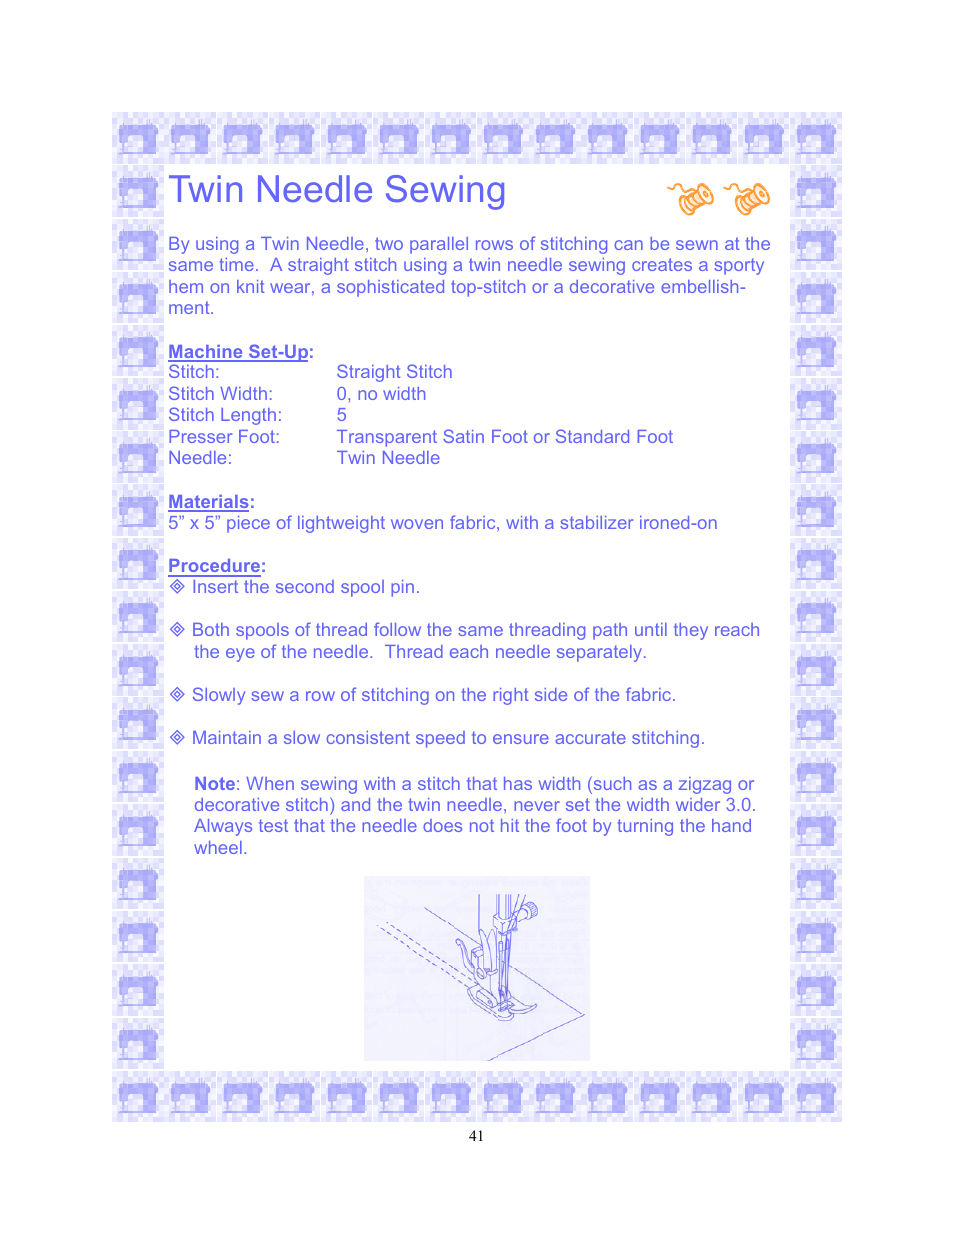 Twin needle sewing | SINGER 6550-WORKBOOK Scholastic User Manual | Page 45 / 59